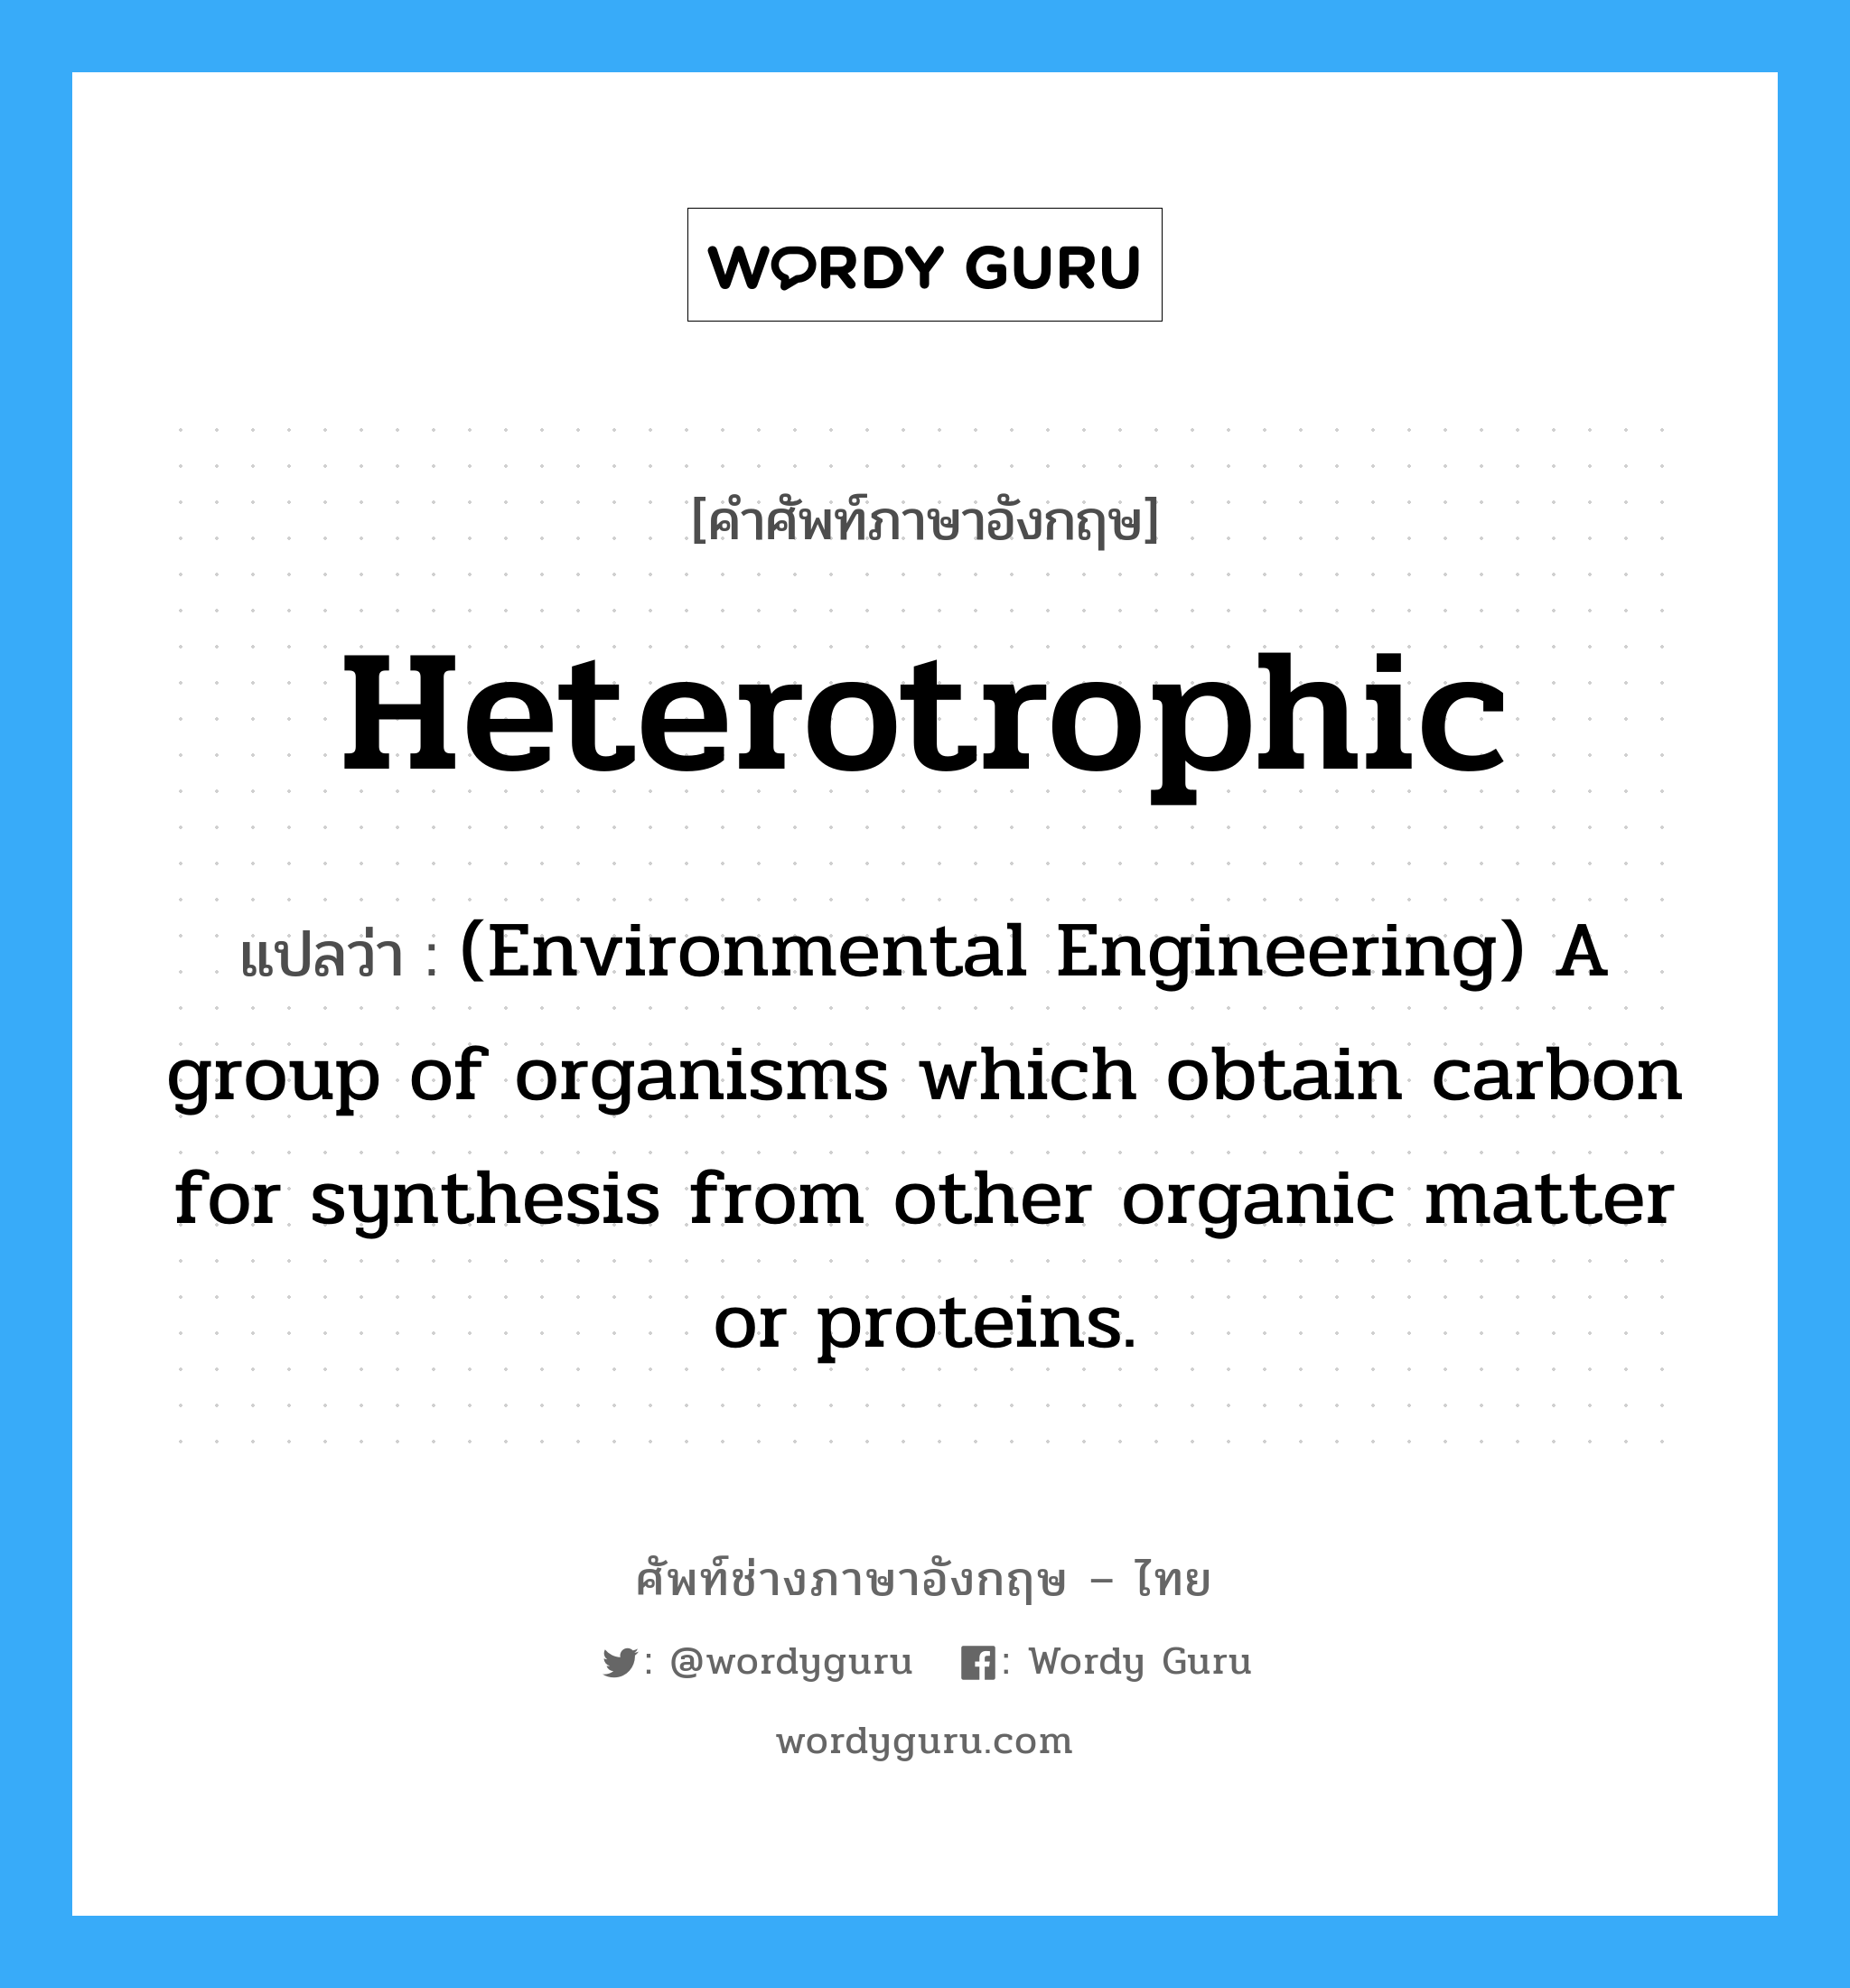 Heterotrophic แปลว่า?, คำศัพท์ช่างภาษาอังกฤษ - ไทย Heterotrophic คำศัพท์ภาษาอังกฤษ Heterotrophic แปลว่า (Environmental Engineering) A group of organisms which obtain carbon for synthesis from other organic matter or proteins.